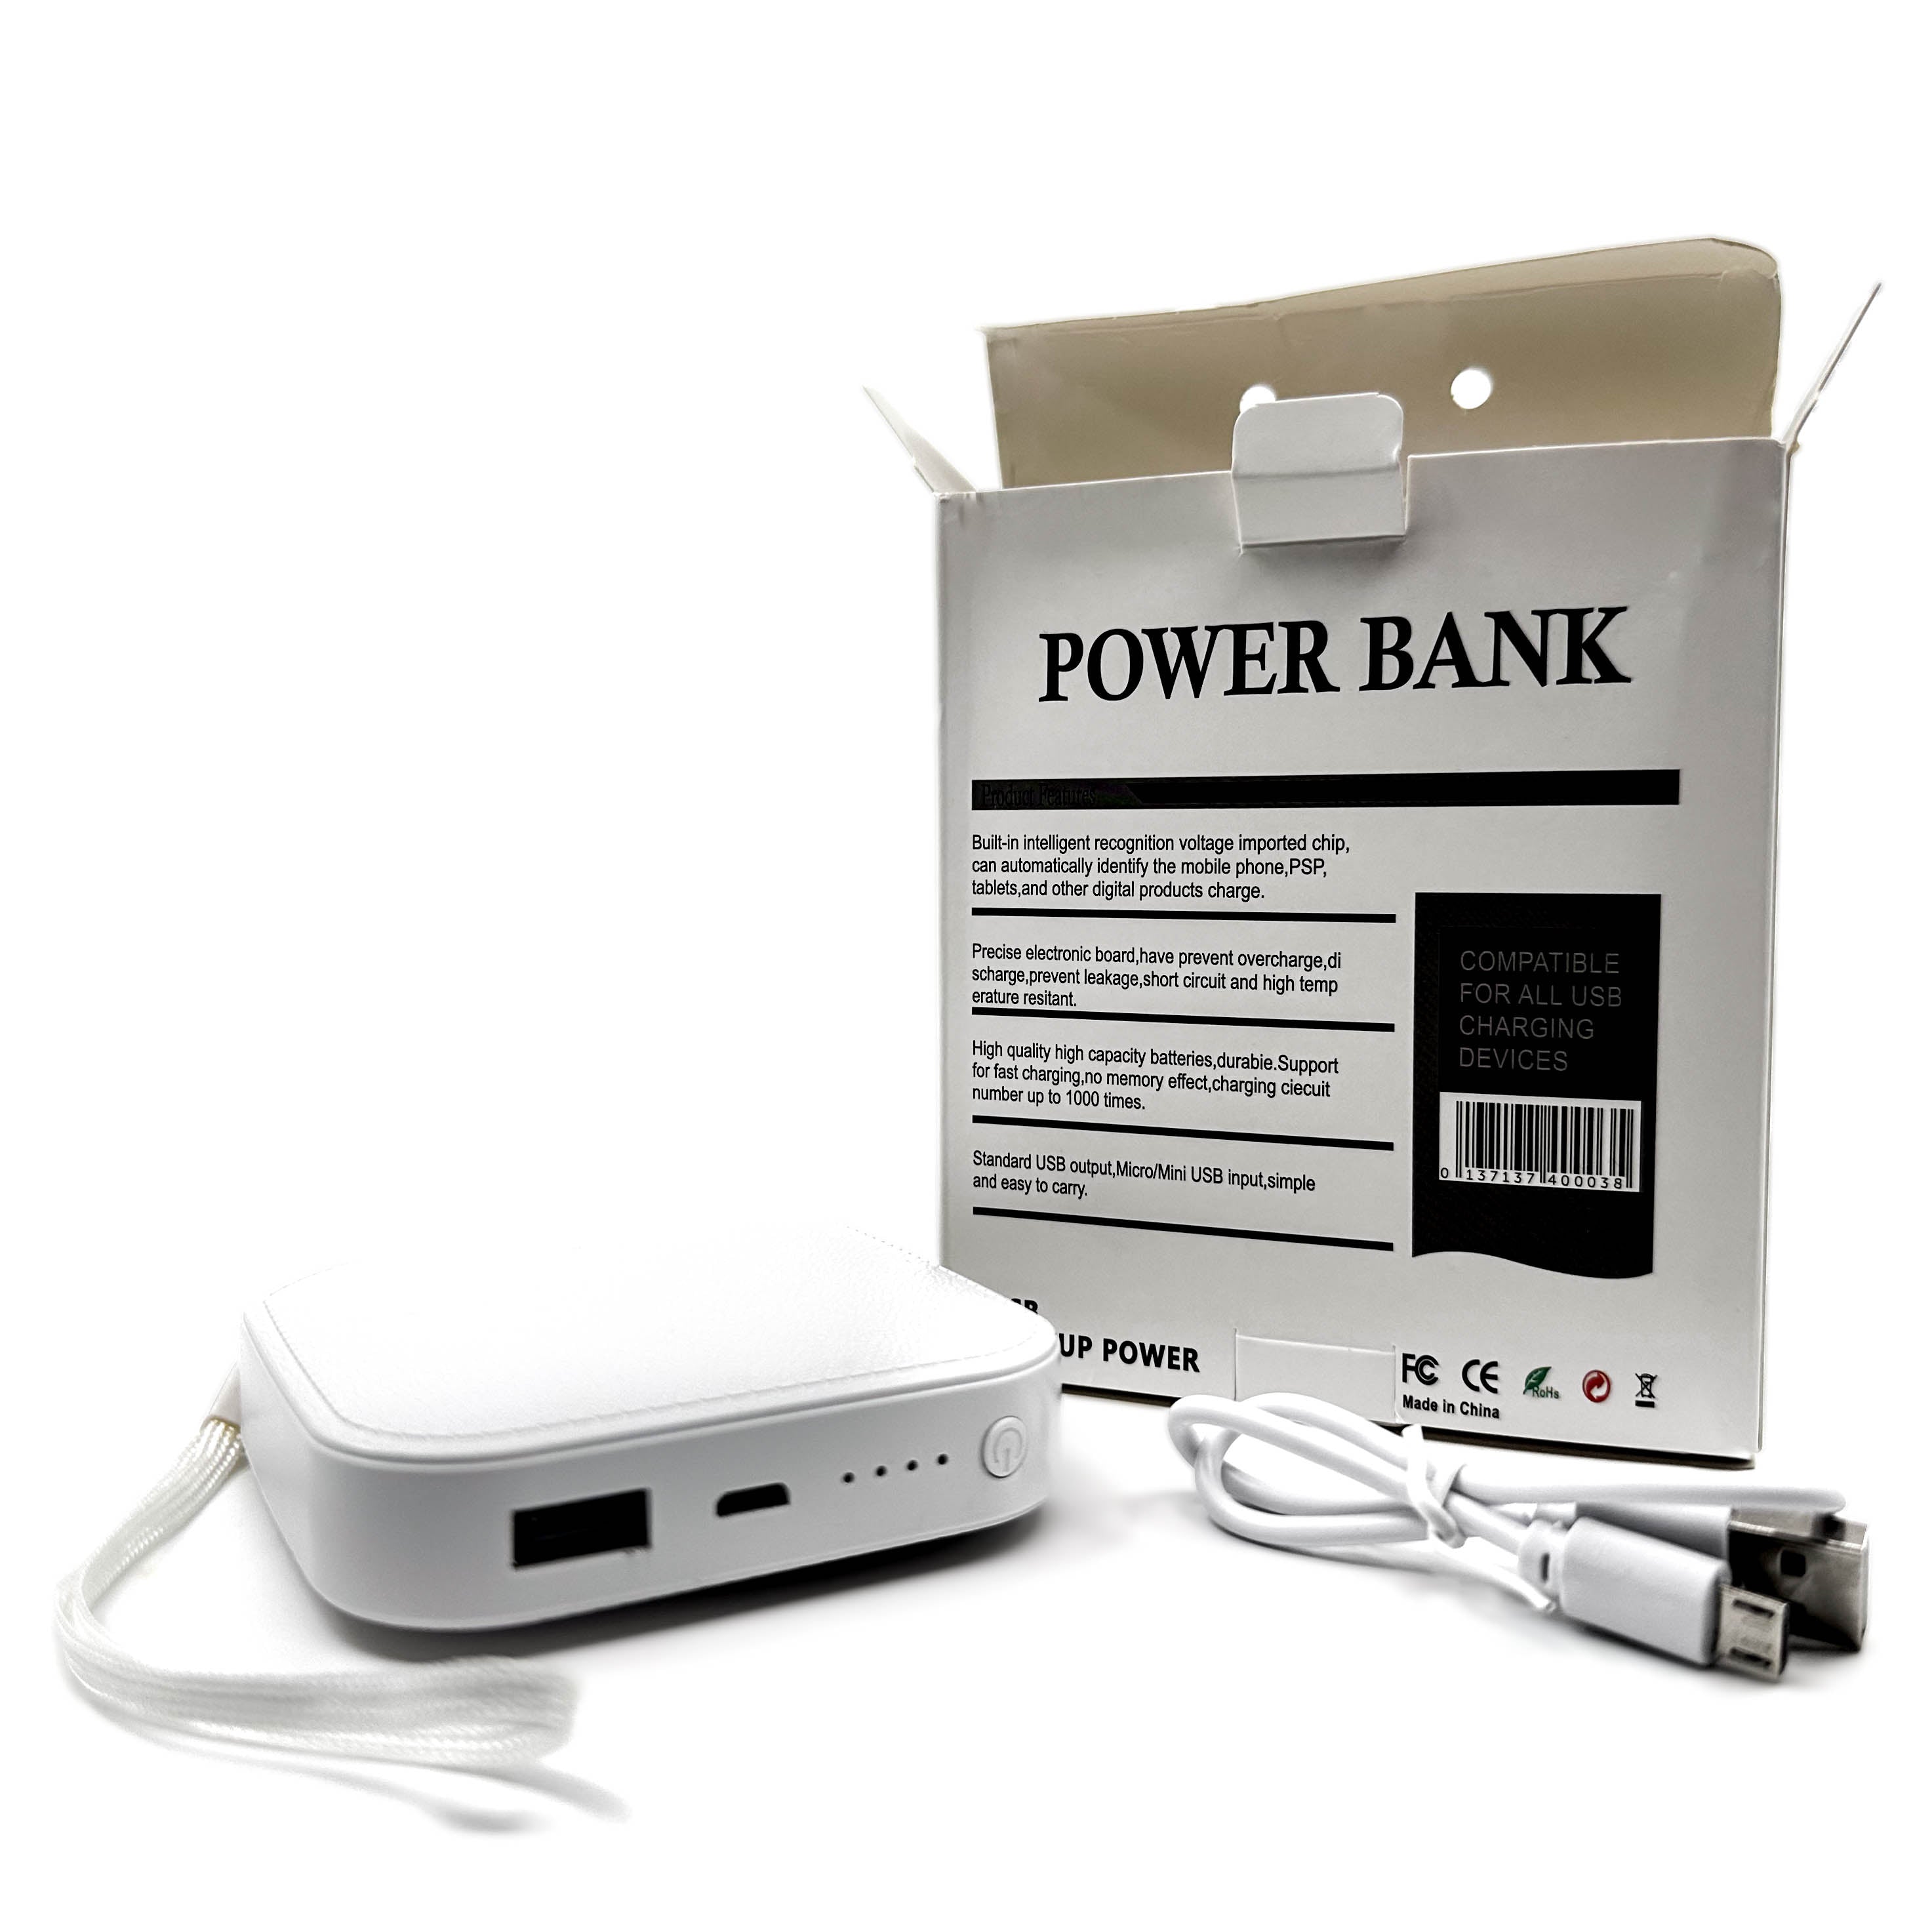 Power Bank 20,000mAH Travel Phone & Device Charger